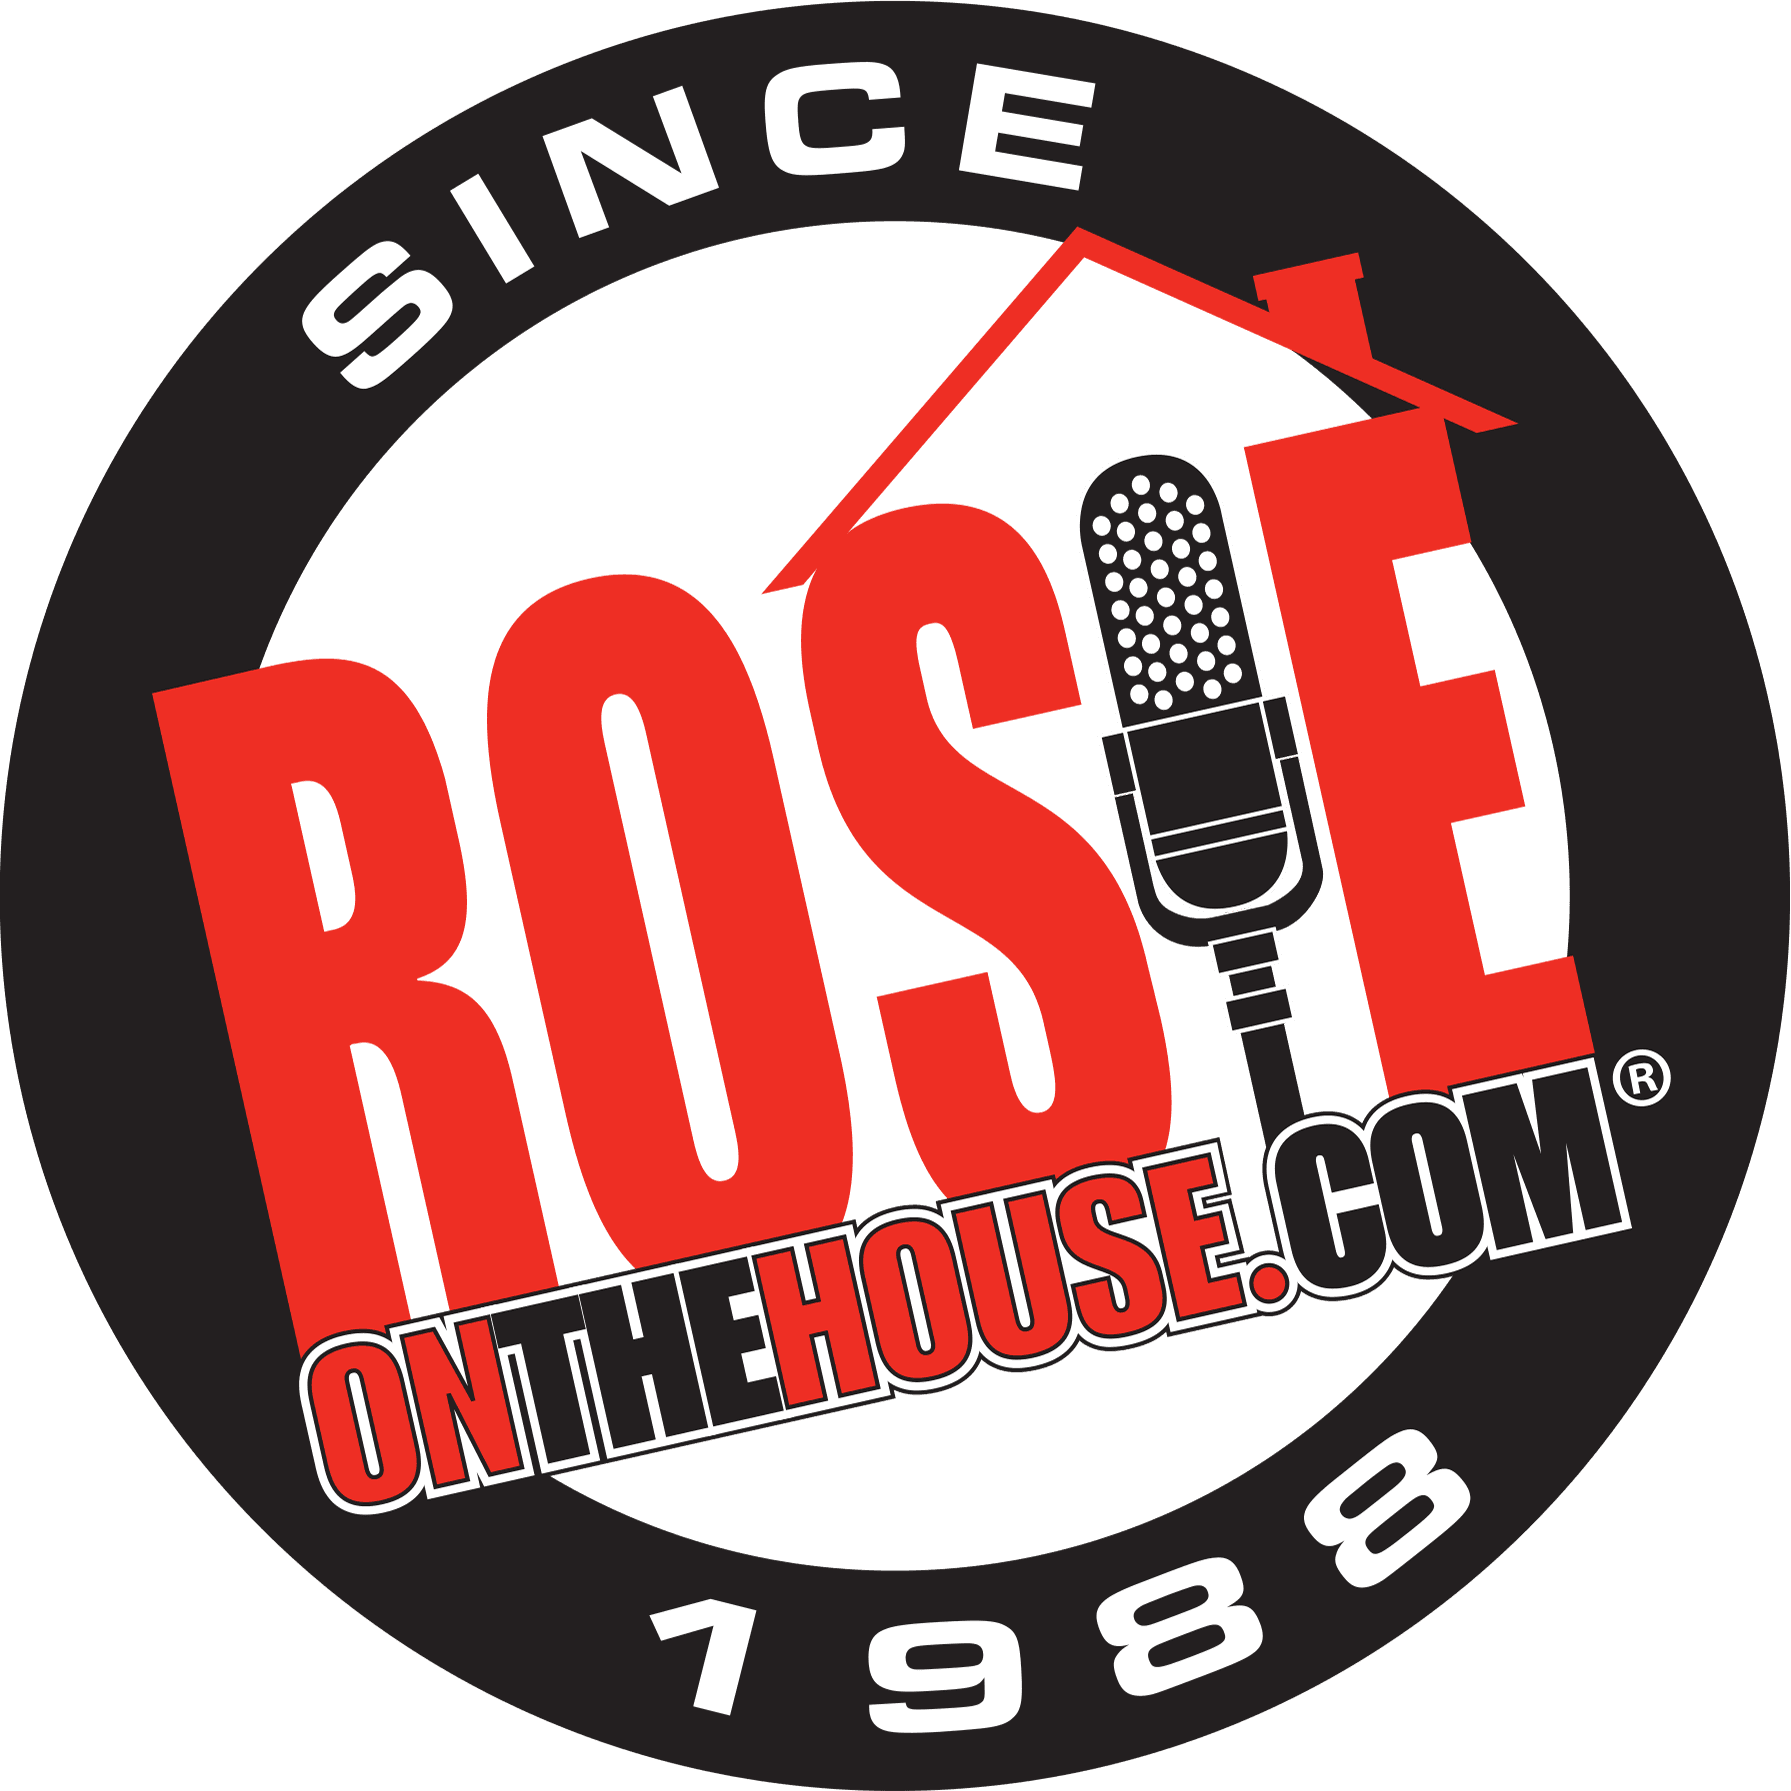 Rosie on the House. Arizona's Most Trusted Contractor Referral Network and Arizona's Longest Running Weekend Radio Broadcast